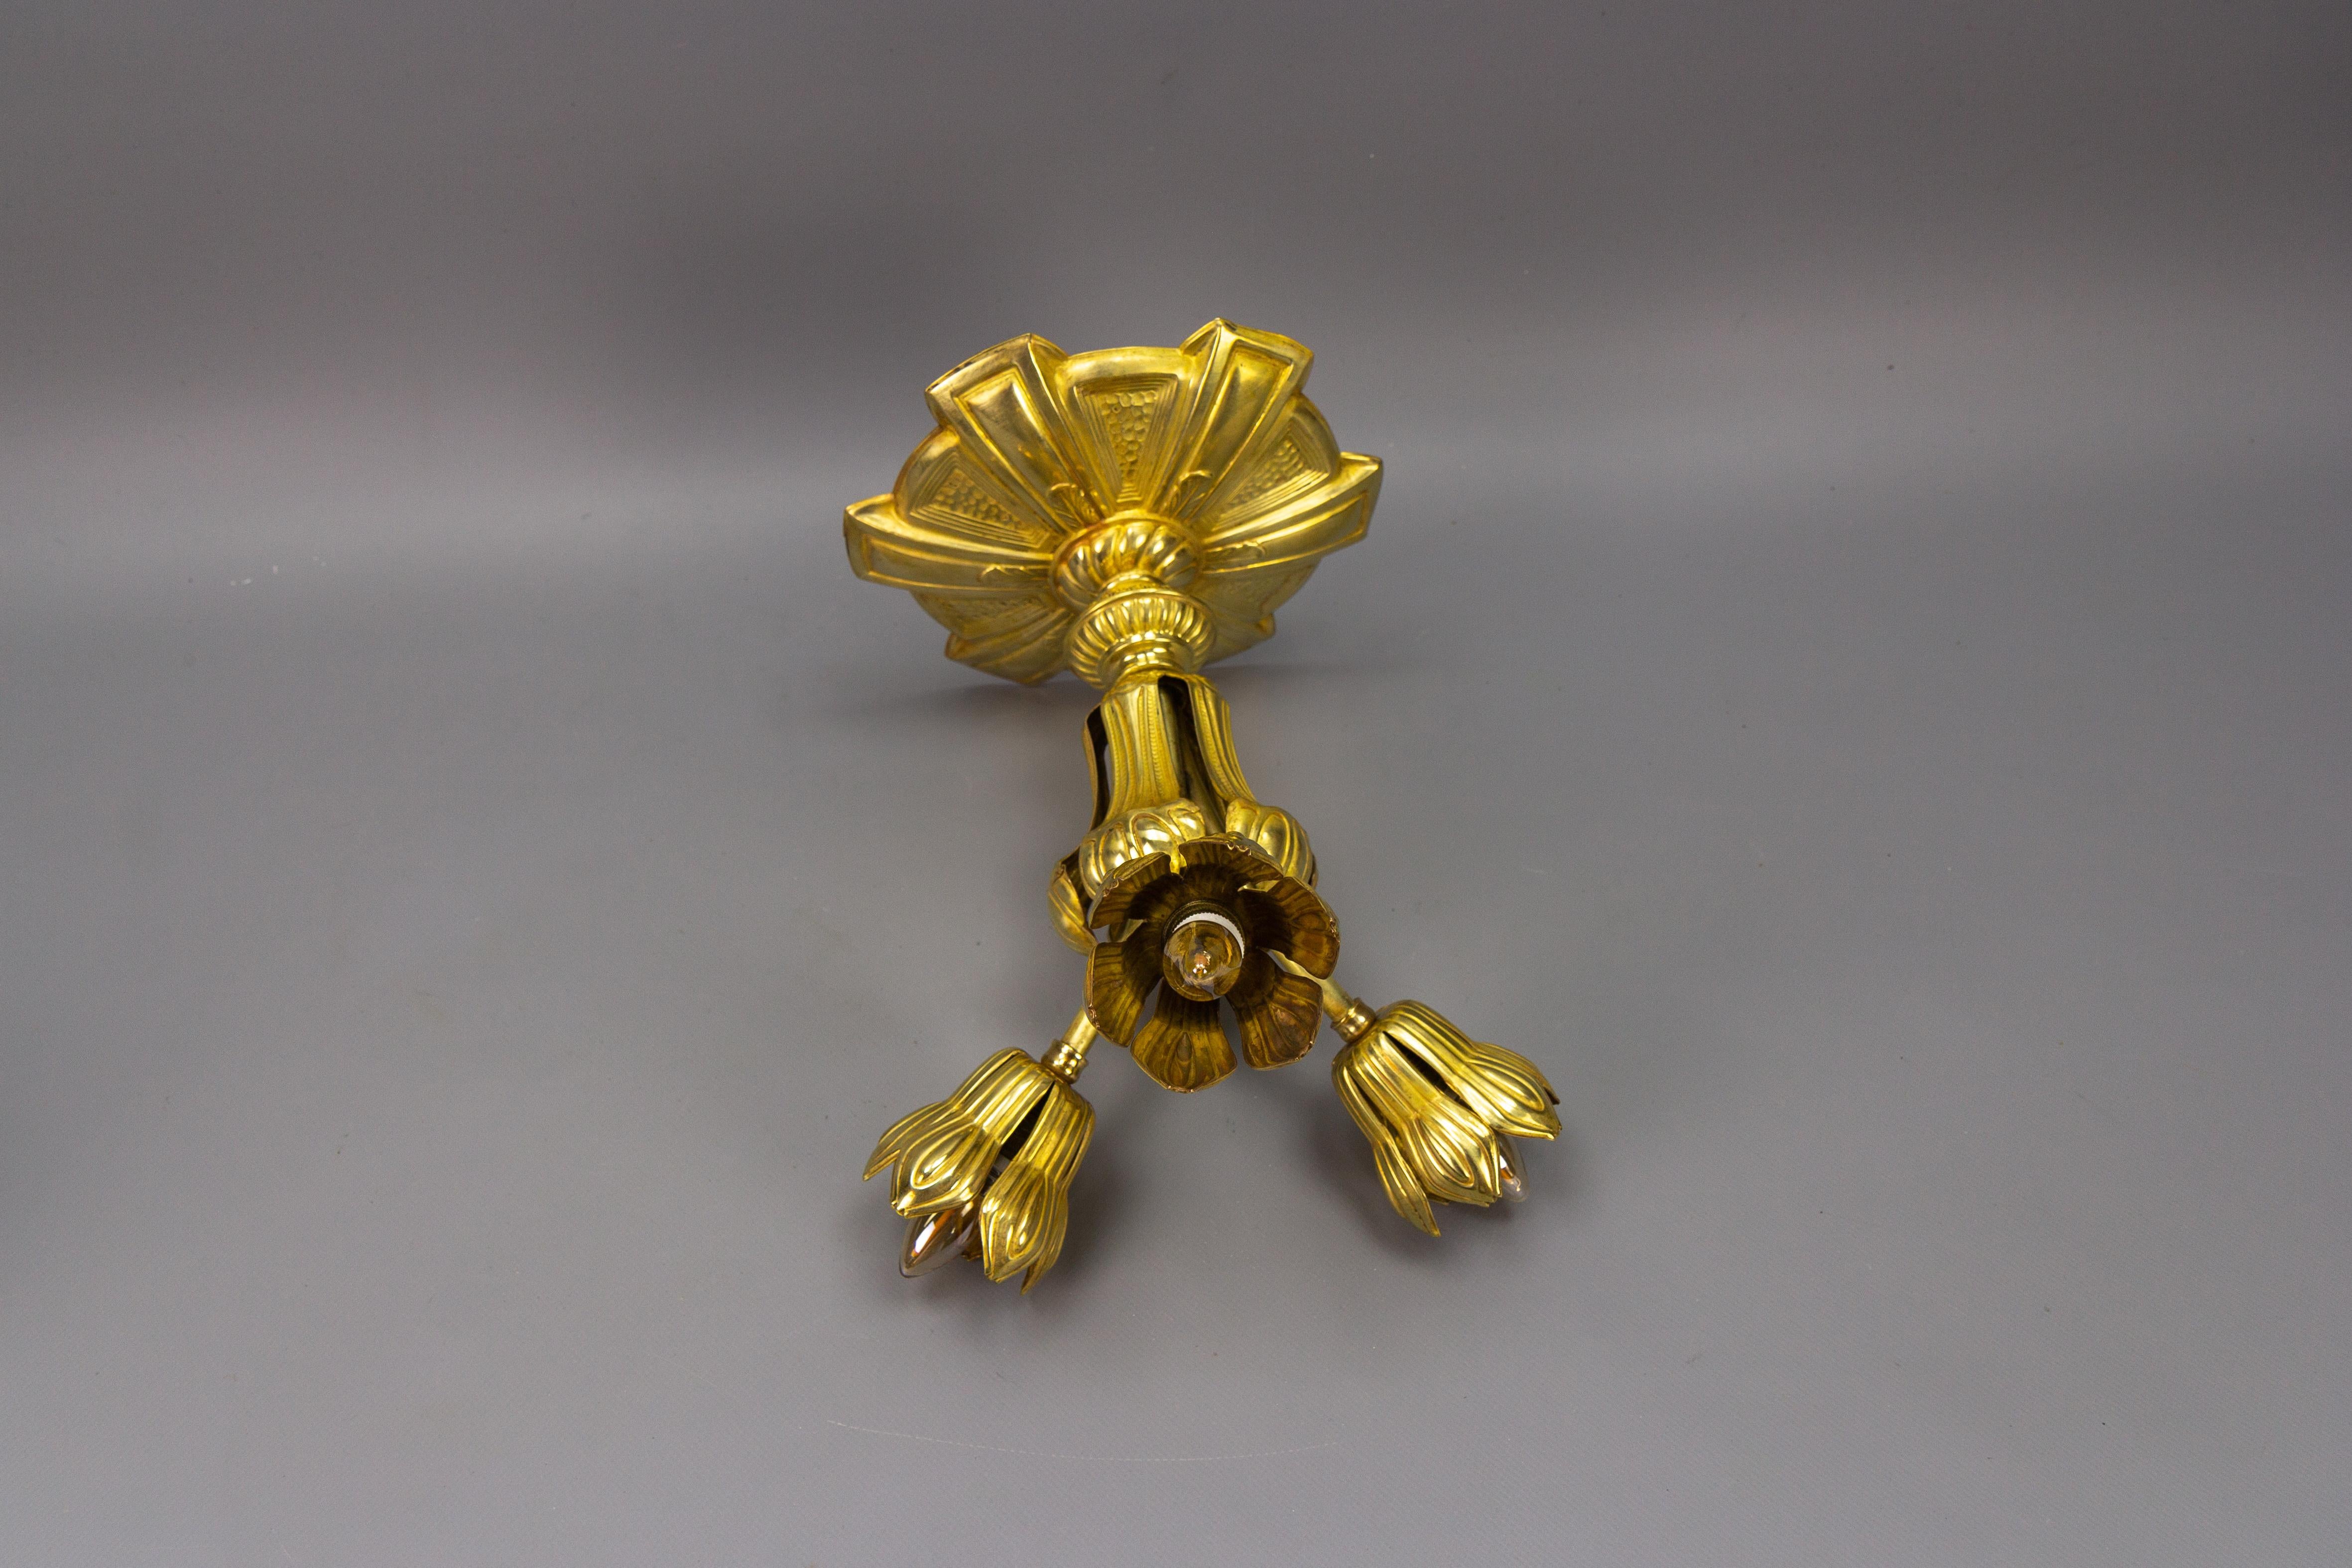  French Art Deco Three-Light Brass Ceiling Light Fixture, 1920s For Sale 9